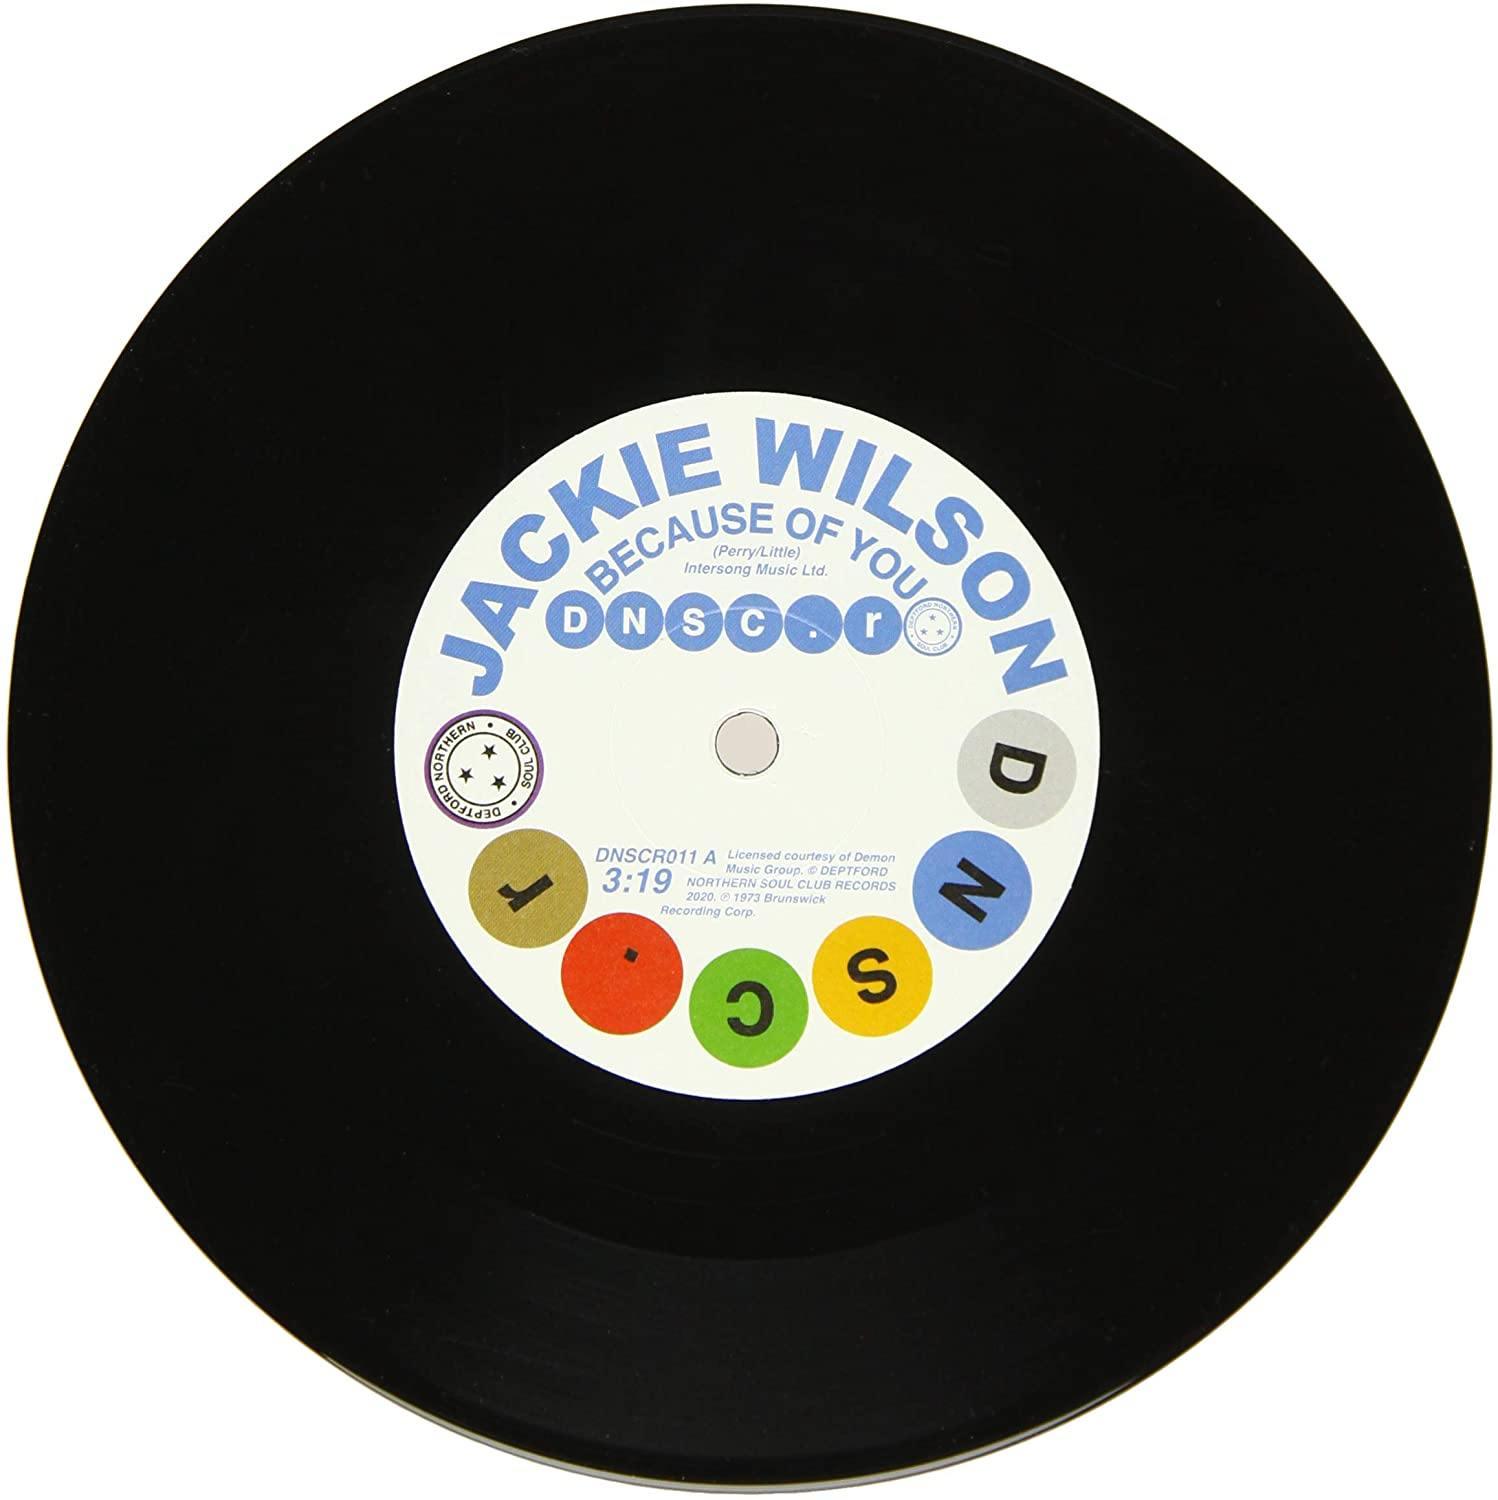 Jackie Wilson & Doris & Kelley: Because Of You/You Don't Have To Worry [7" VINYL] - DD Music Geek